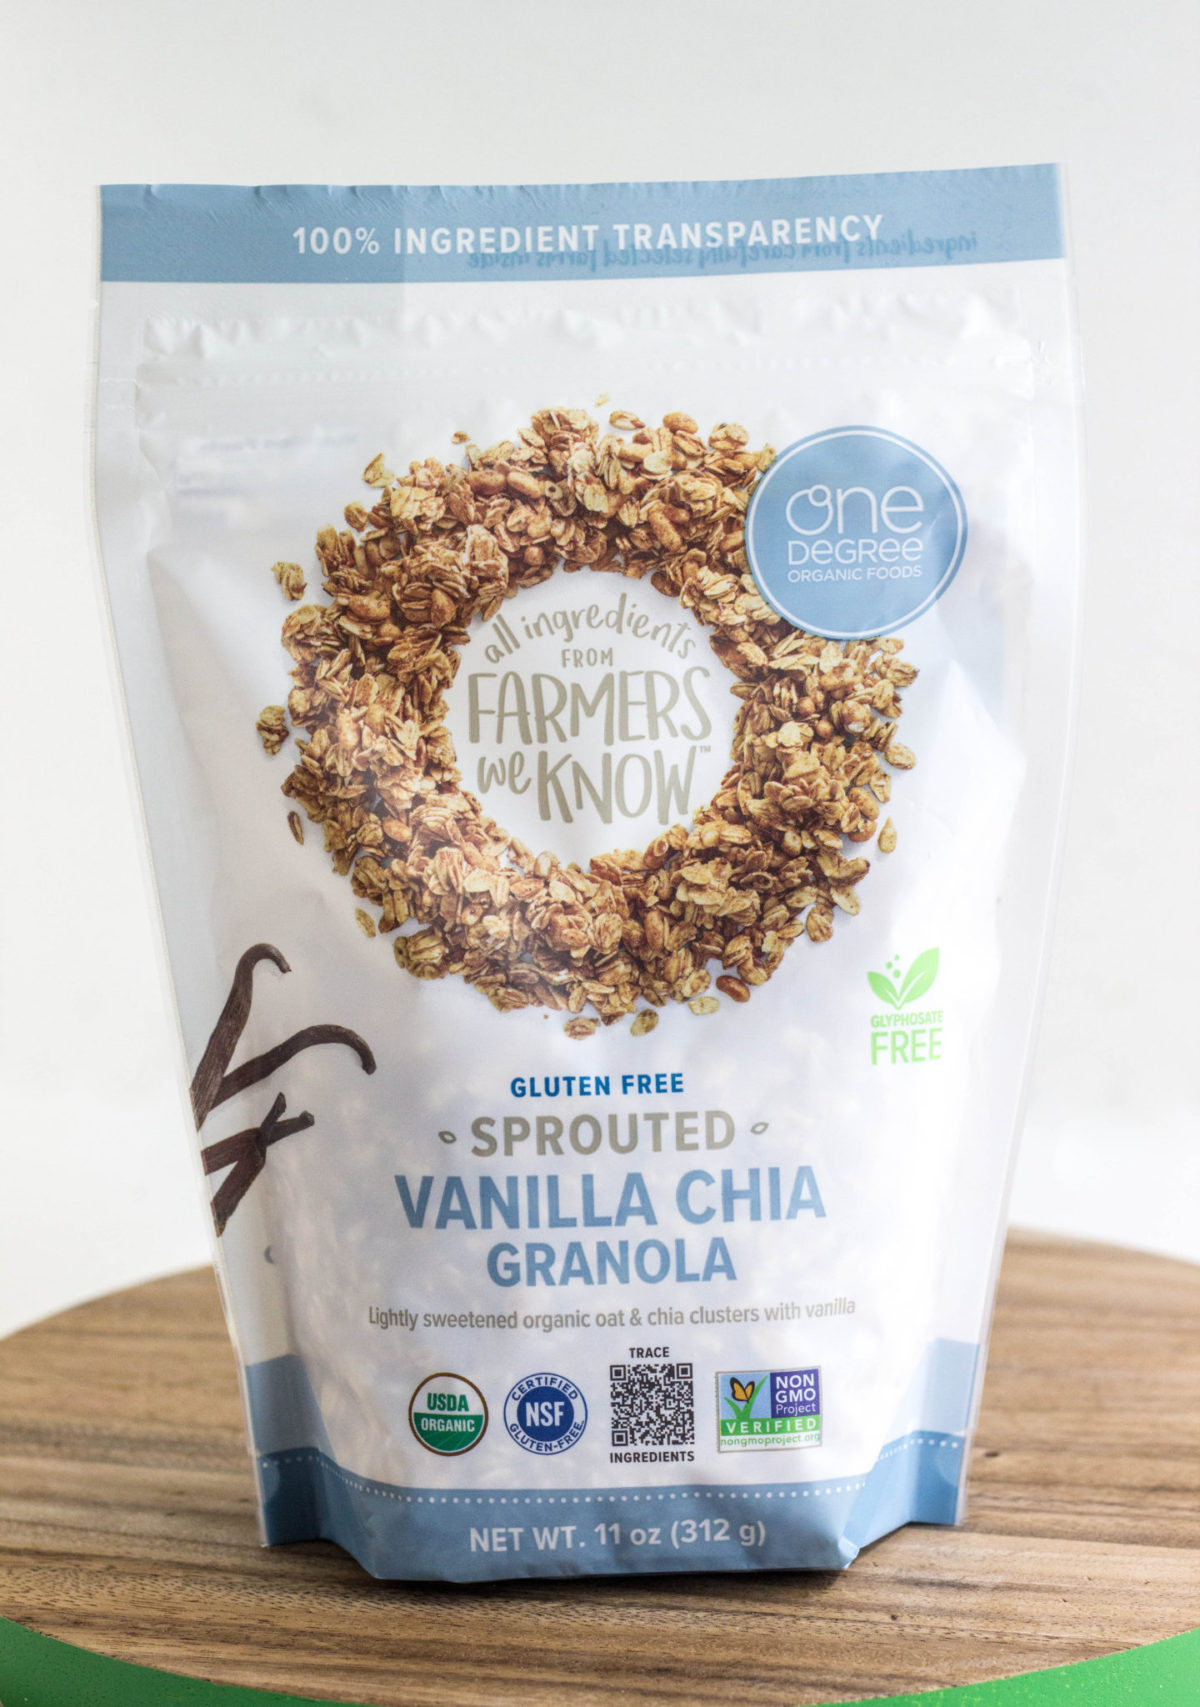 Bag of One Degree Organic Sprouted Vanilla Chia Granola.